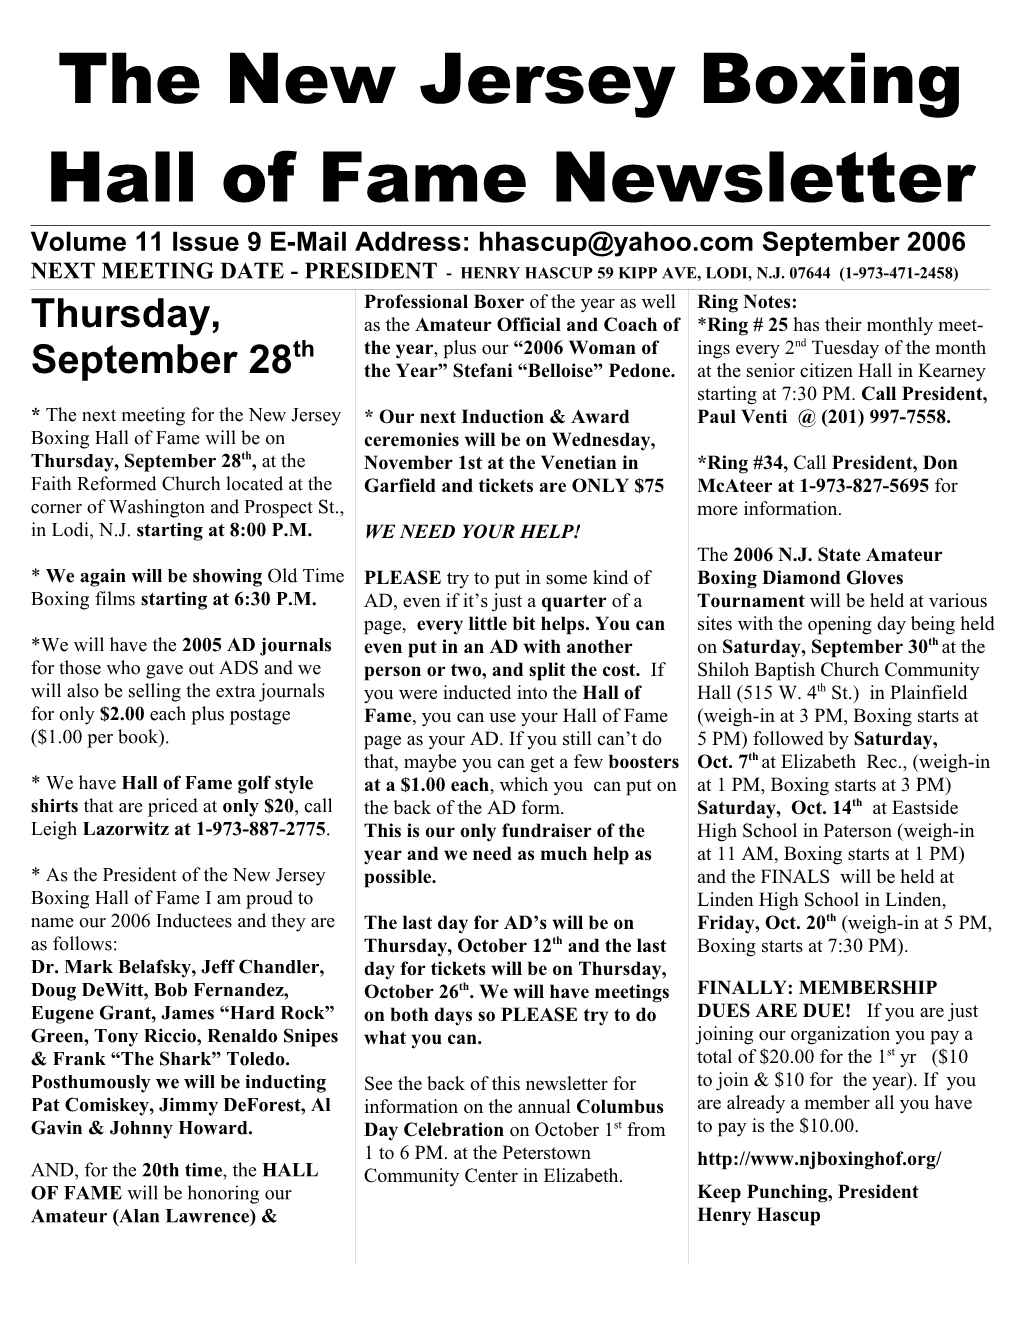 The New Jersey Boxing Hall of Fame Newsletter